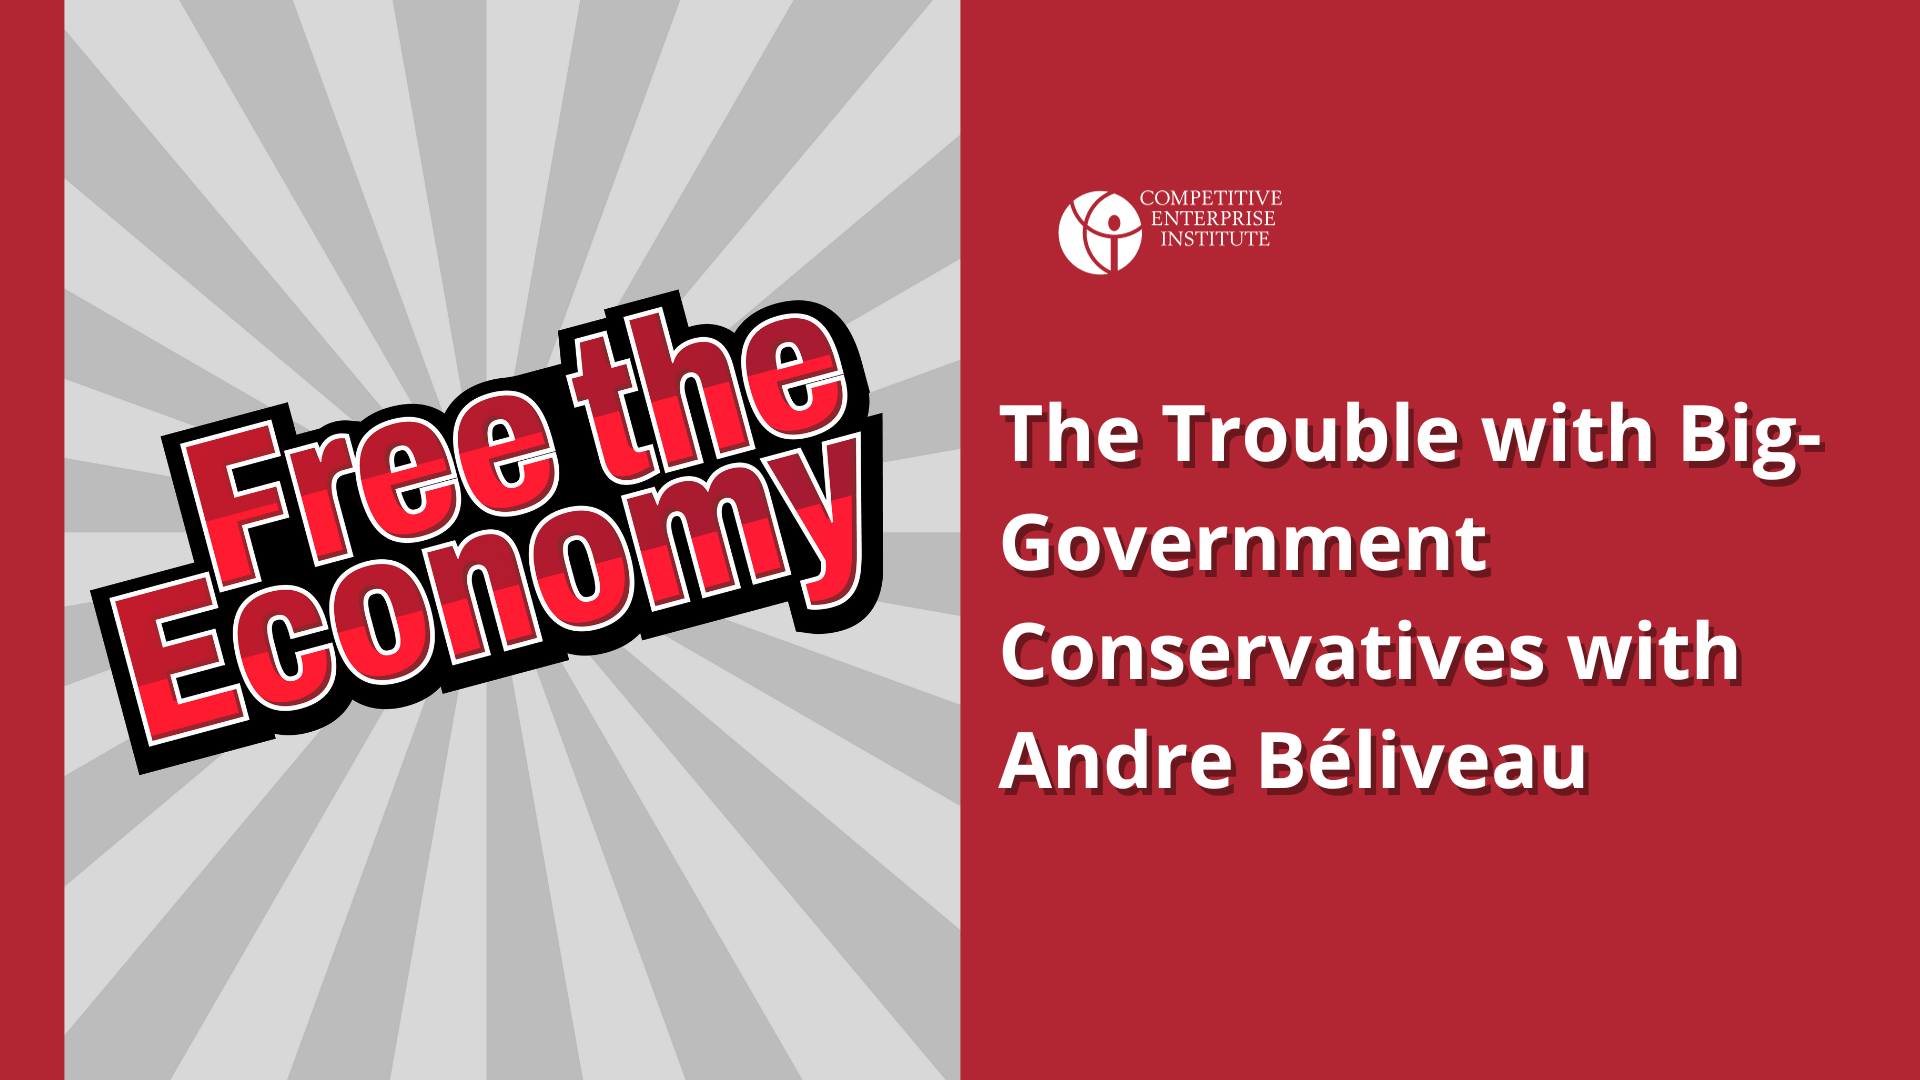 The Trouble with Big-Government Conservatives with Andre Béliveau